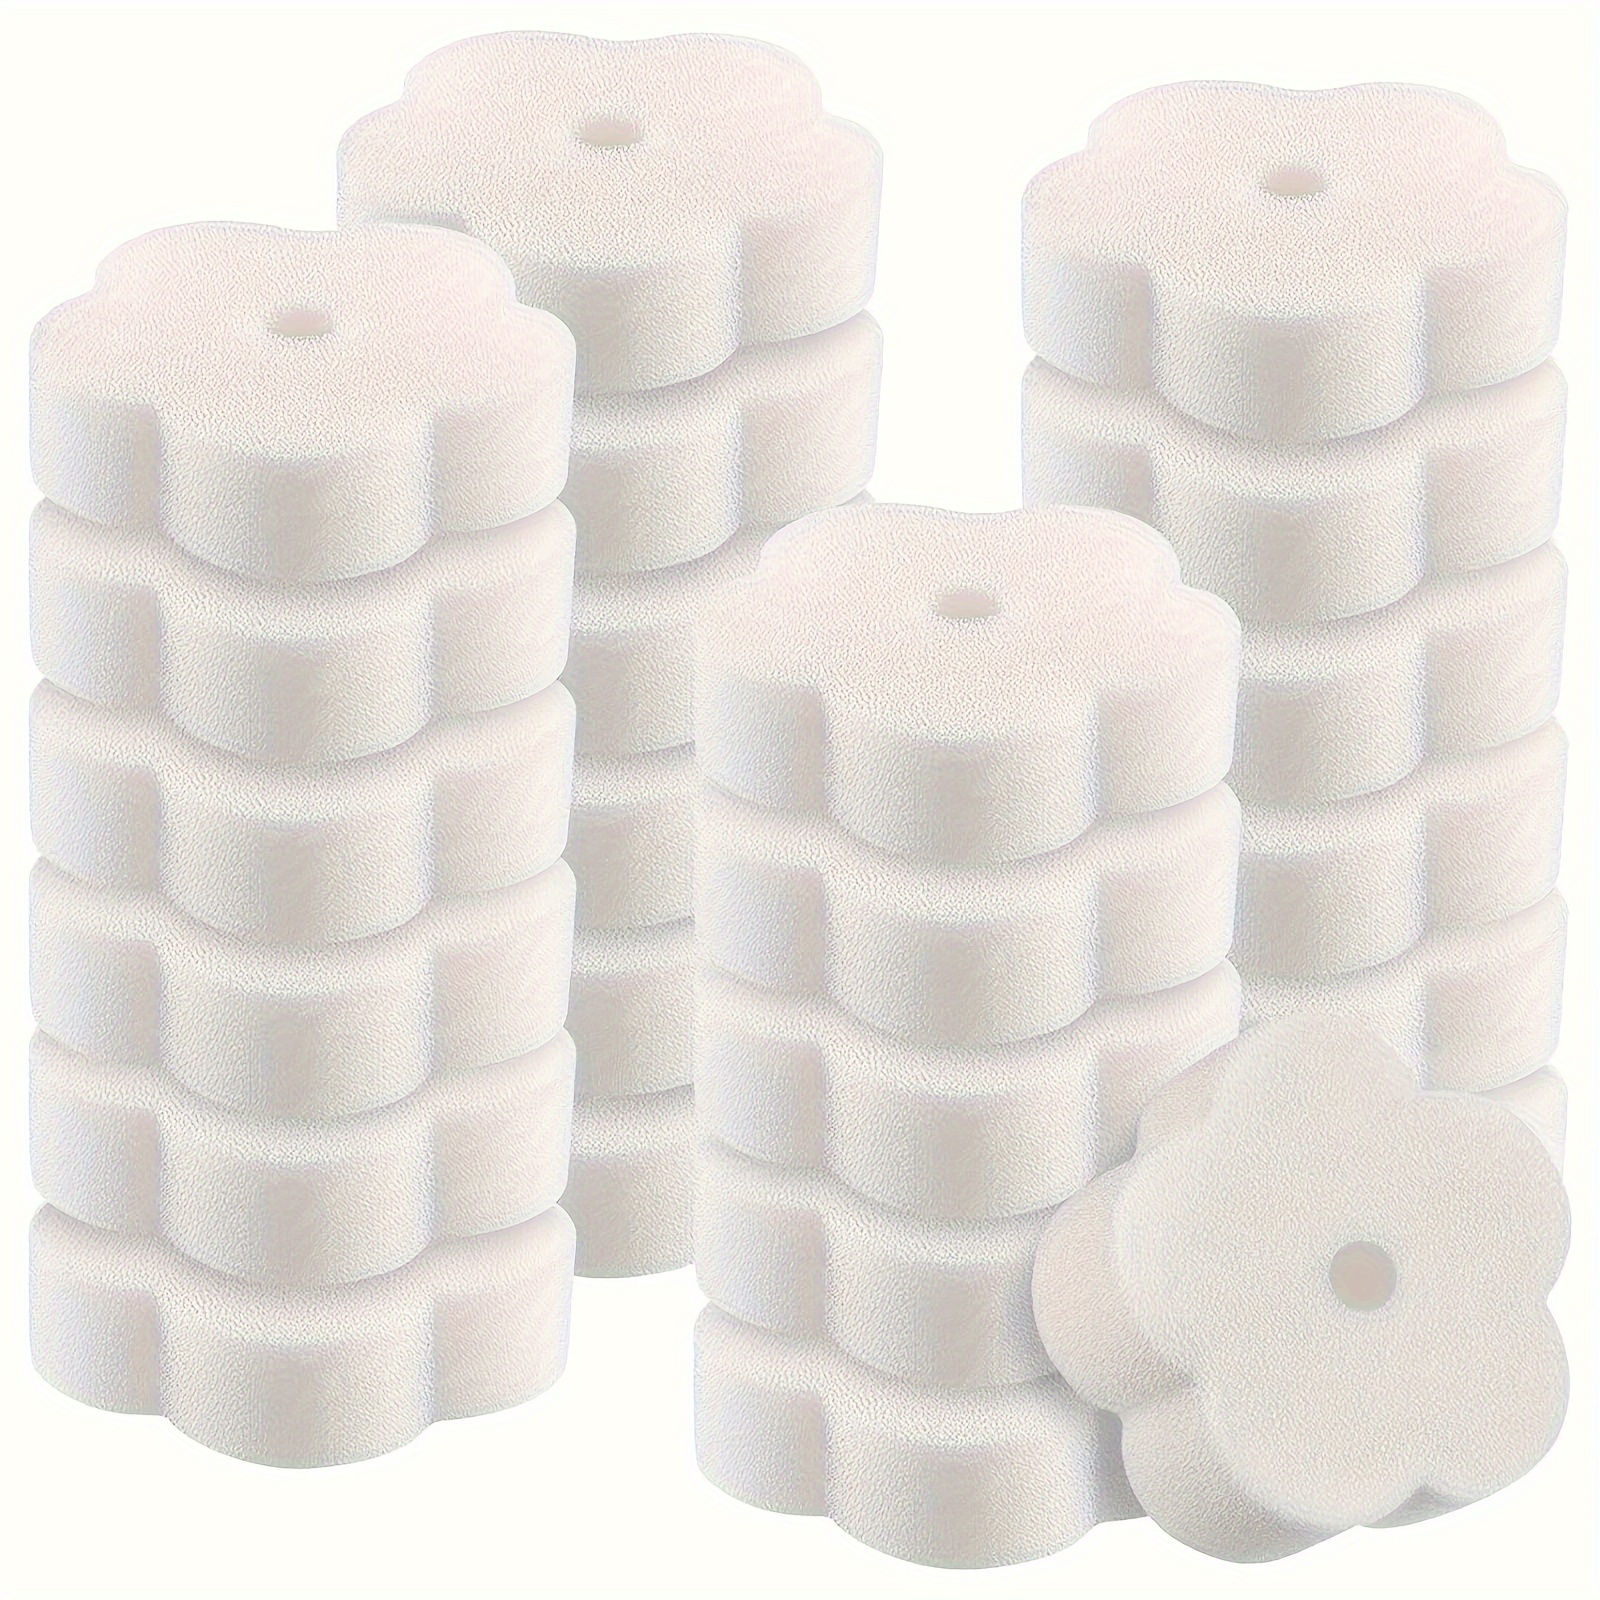 

24pcs, Oil Absorbing Scum Sponge, Cleaning Sponge For Swimming Pool And Spa Accessories, Flower 3.54x3.54x1.18inch